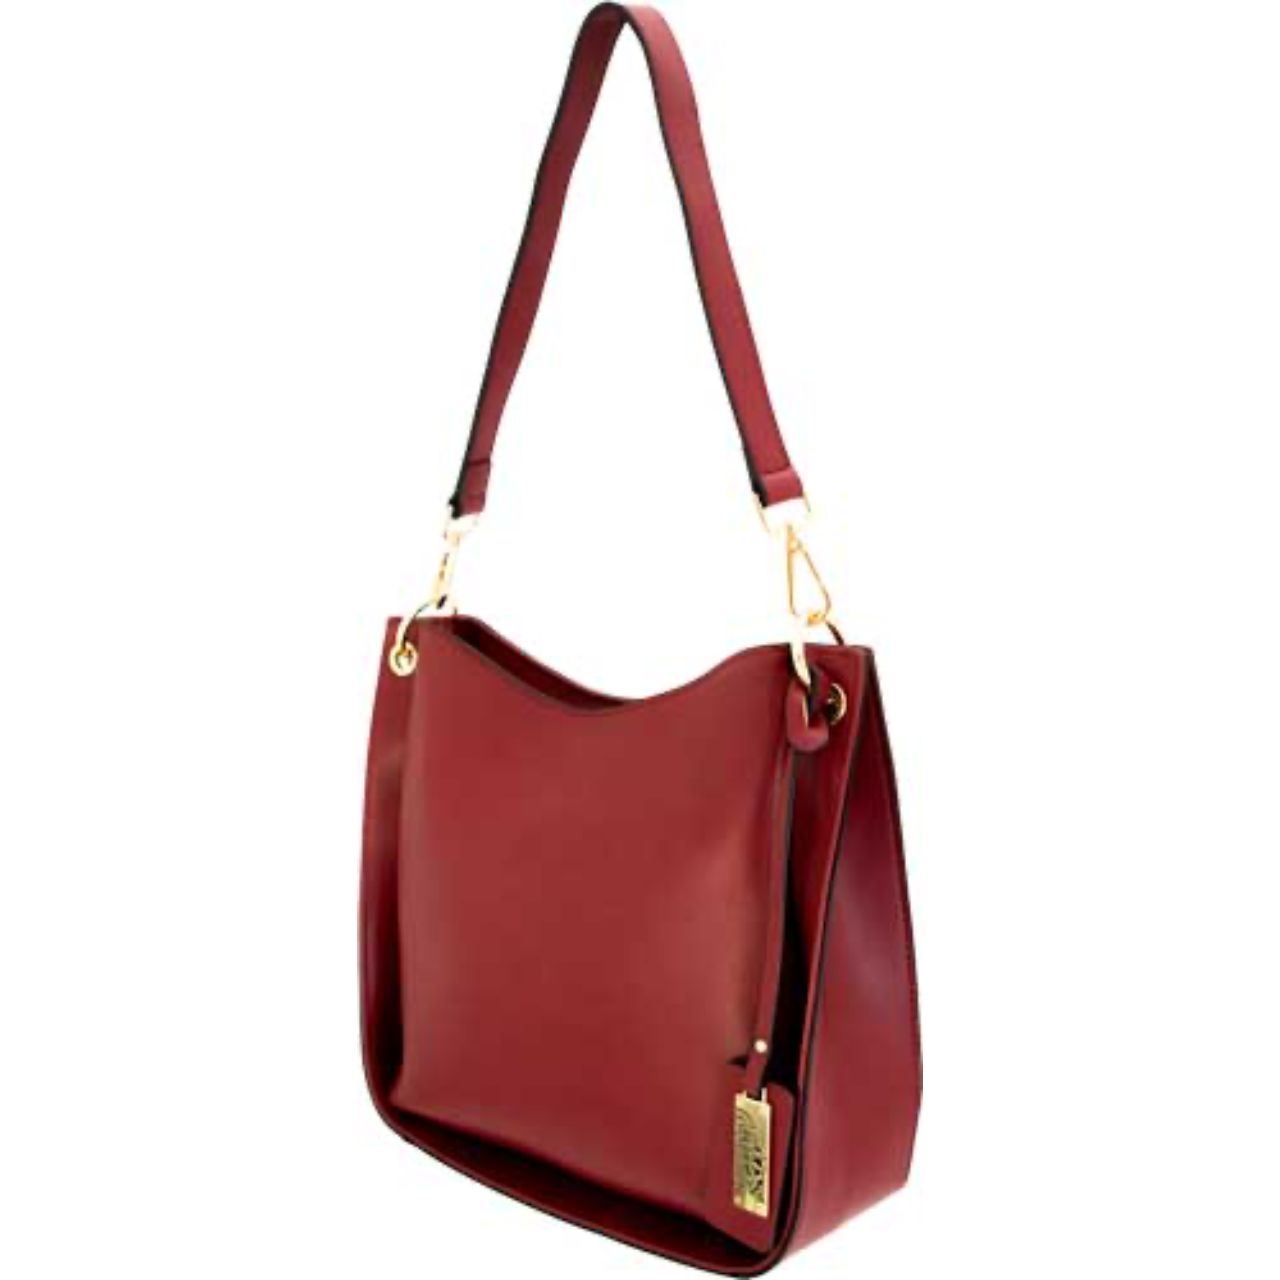 Burgundy Concealed Carry Purse